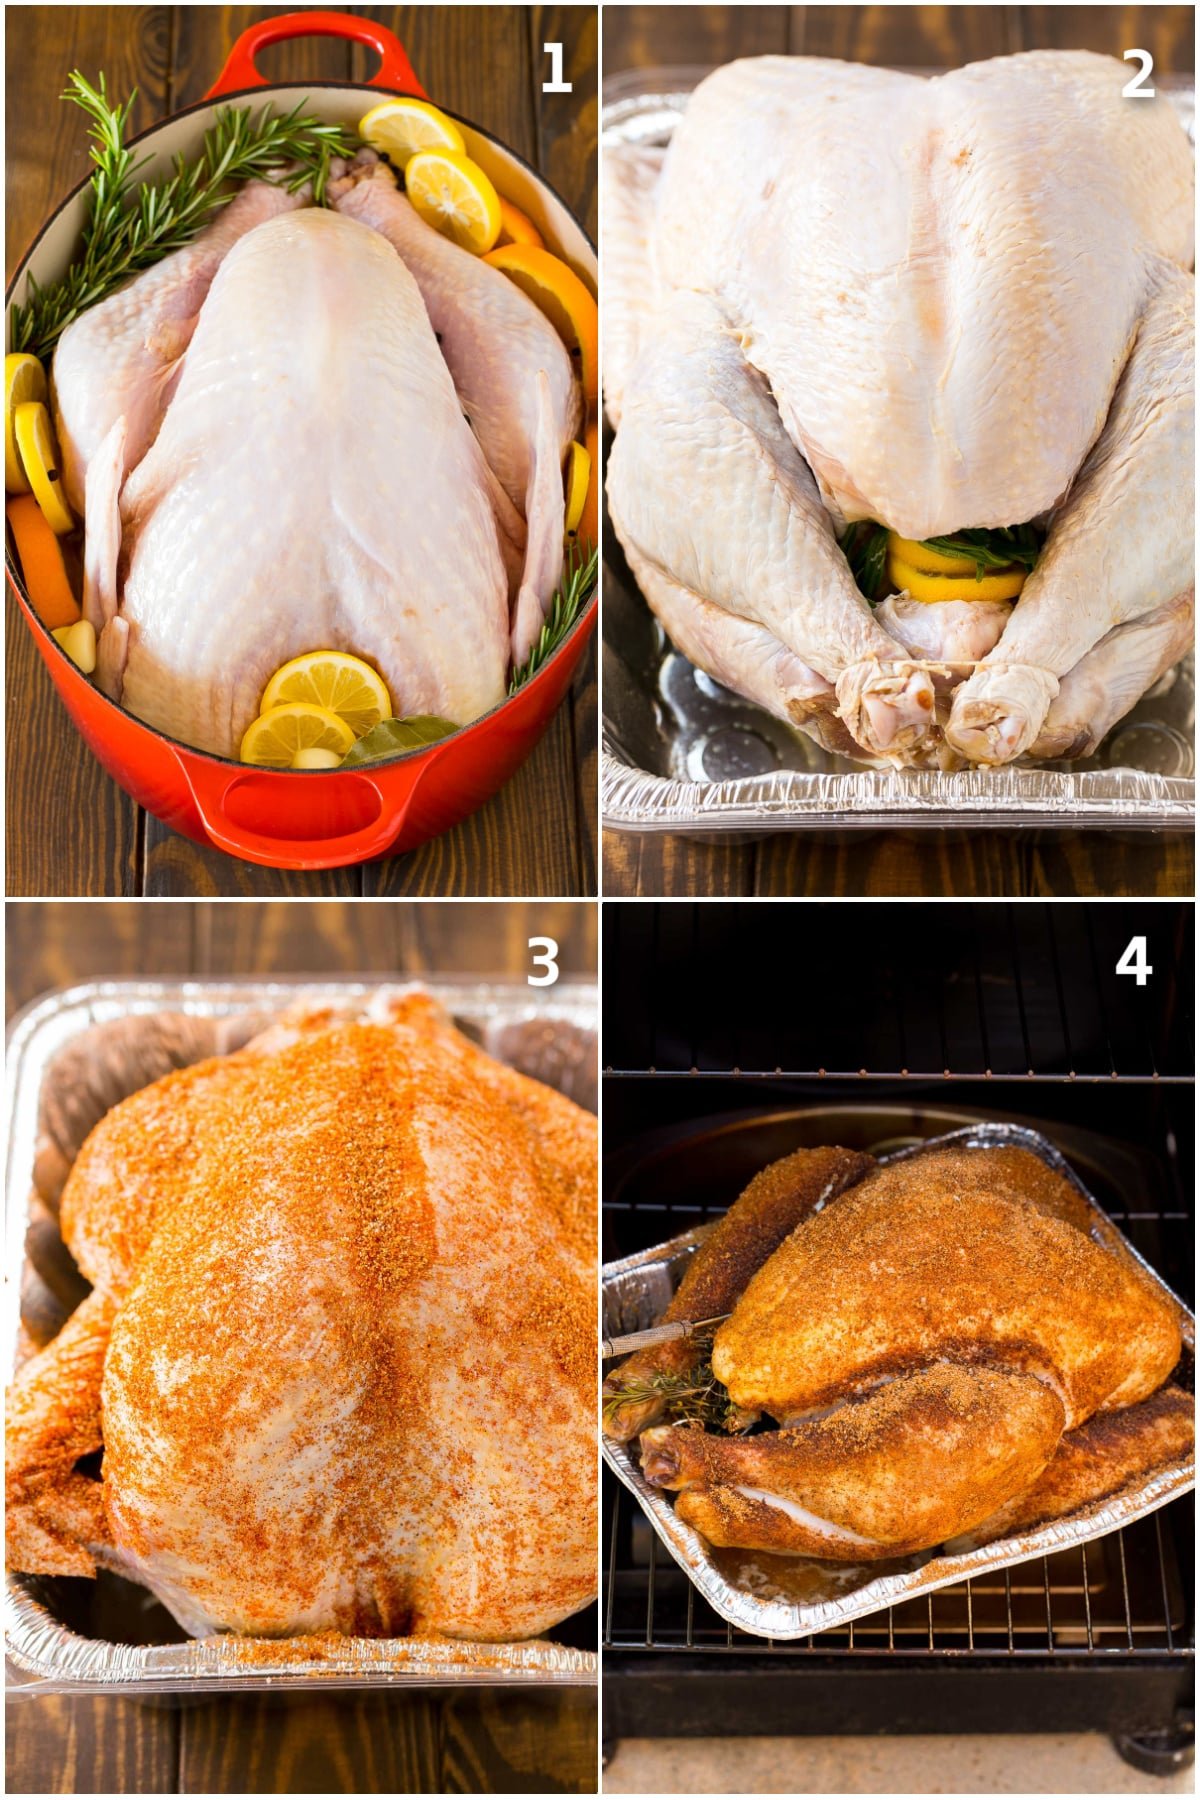 Step by step process shots showing how to smoke a turkey.